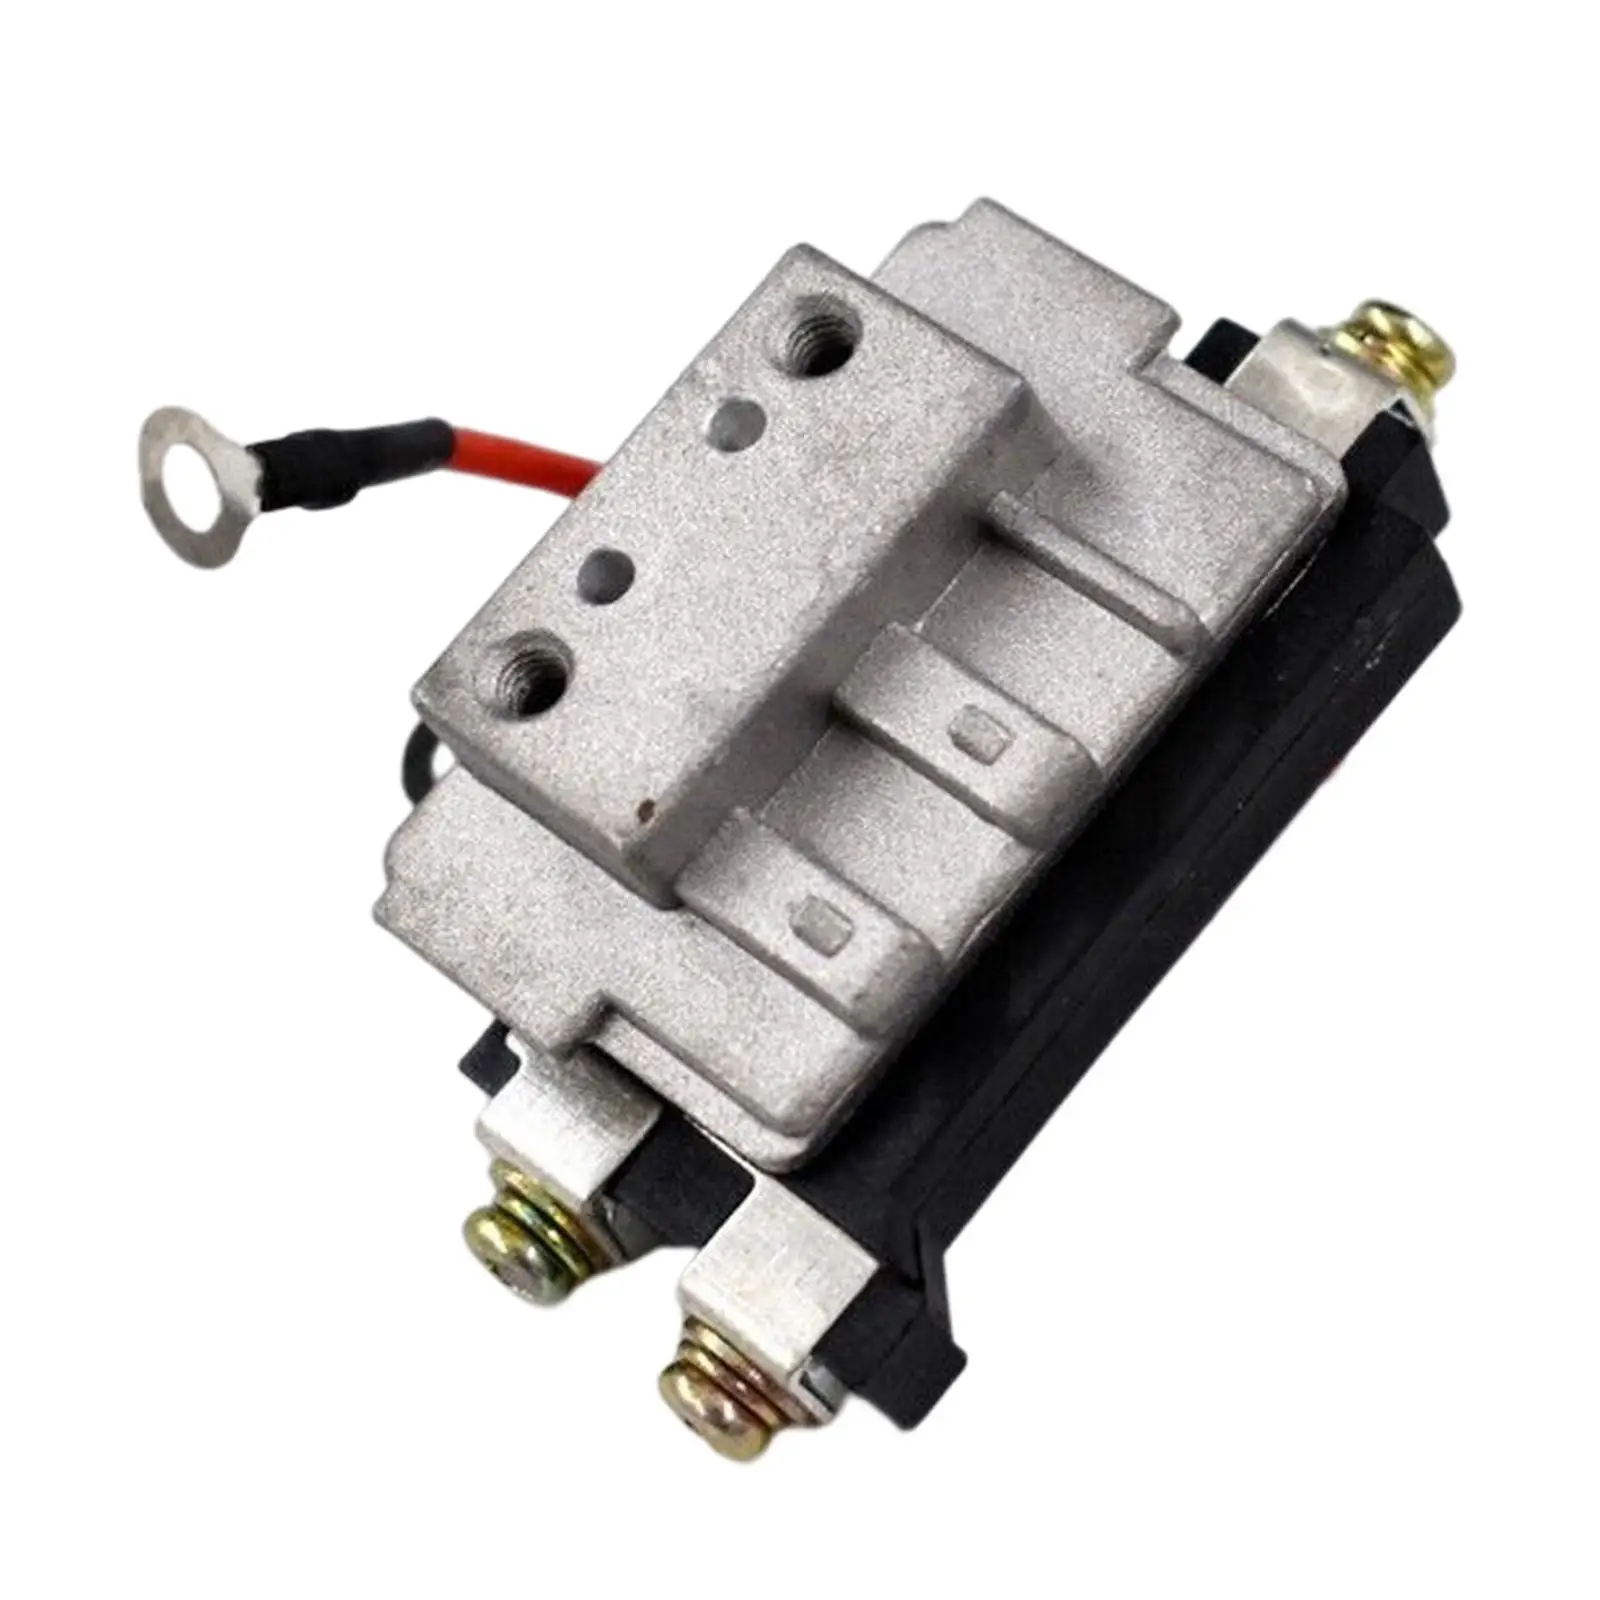 Ignition Control Module Direct Replaces for Toyota Corolla 1993- 1995